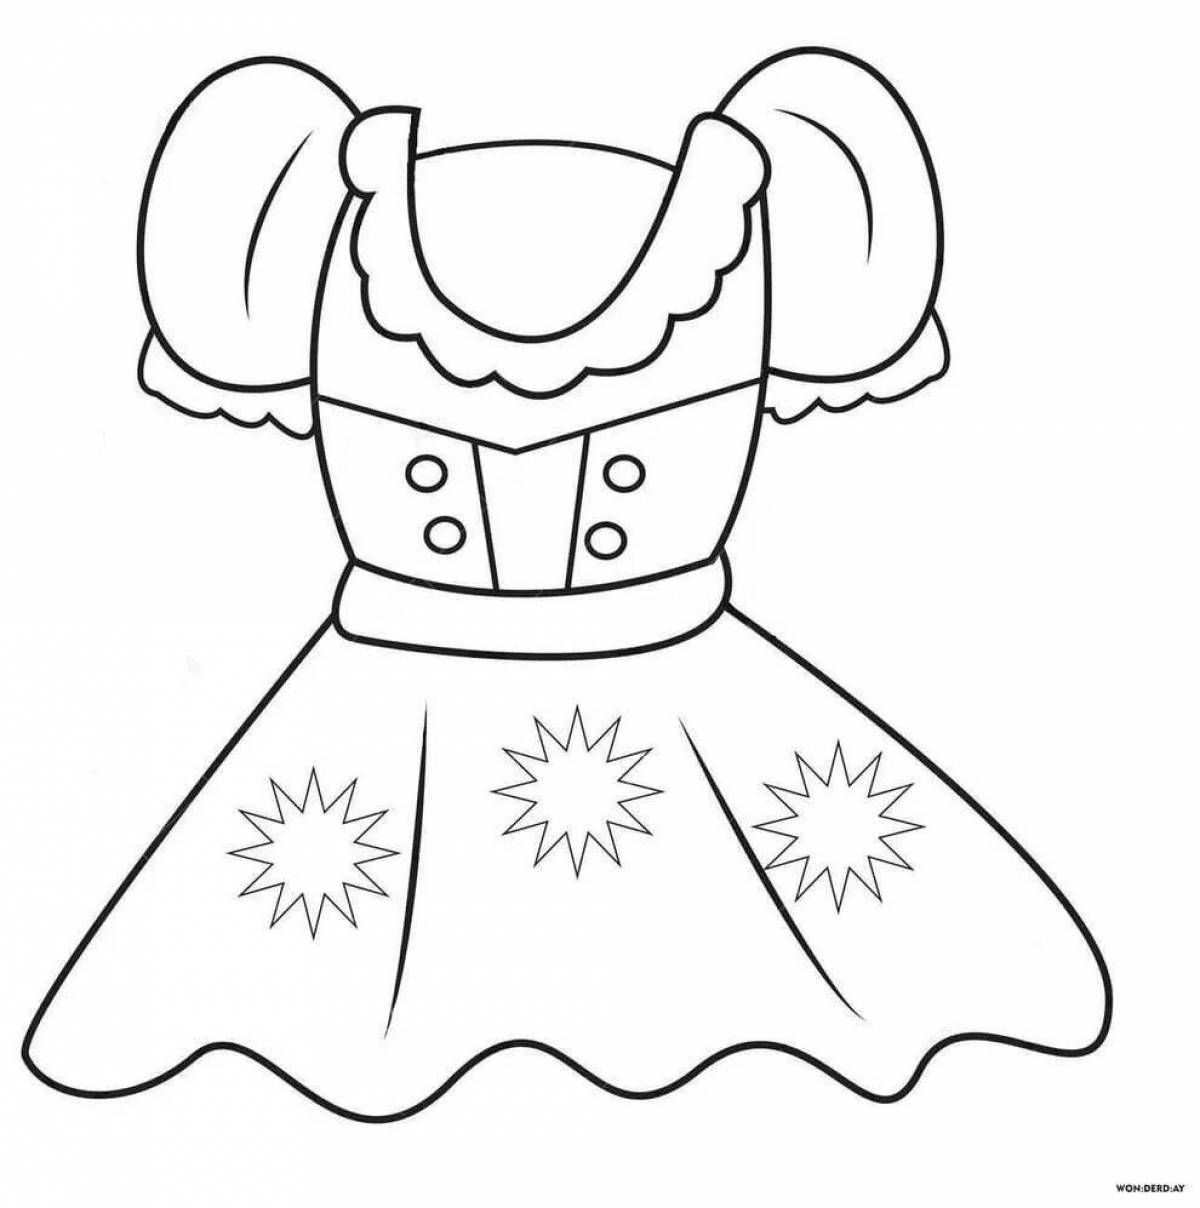 Amazing sundress patterns coloring pages for kids